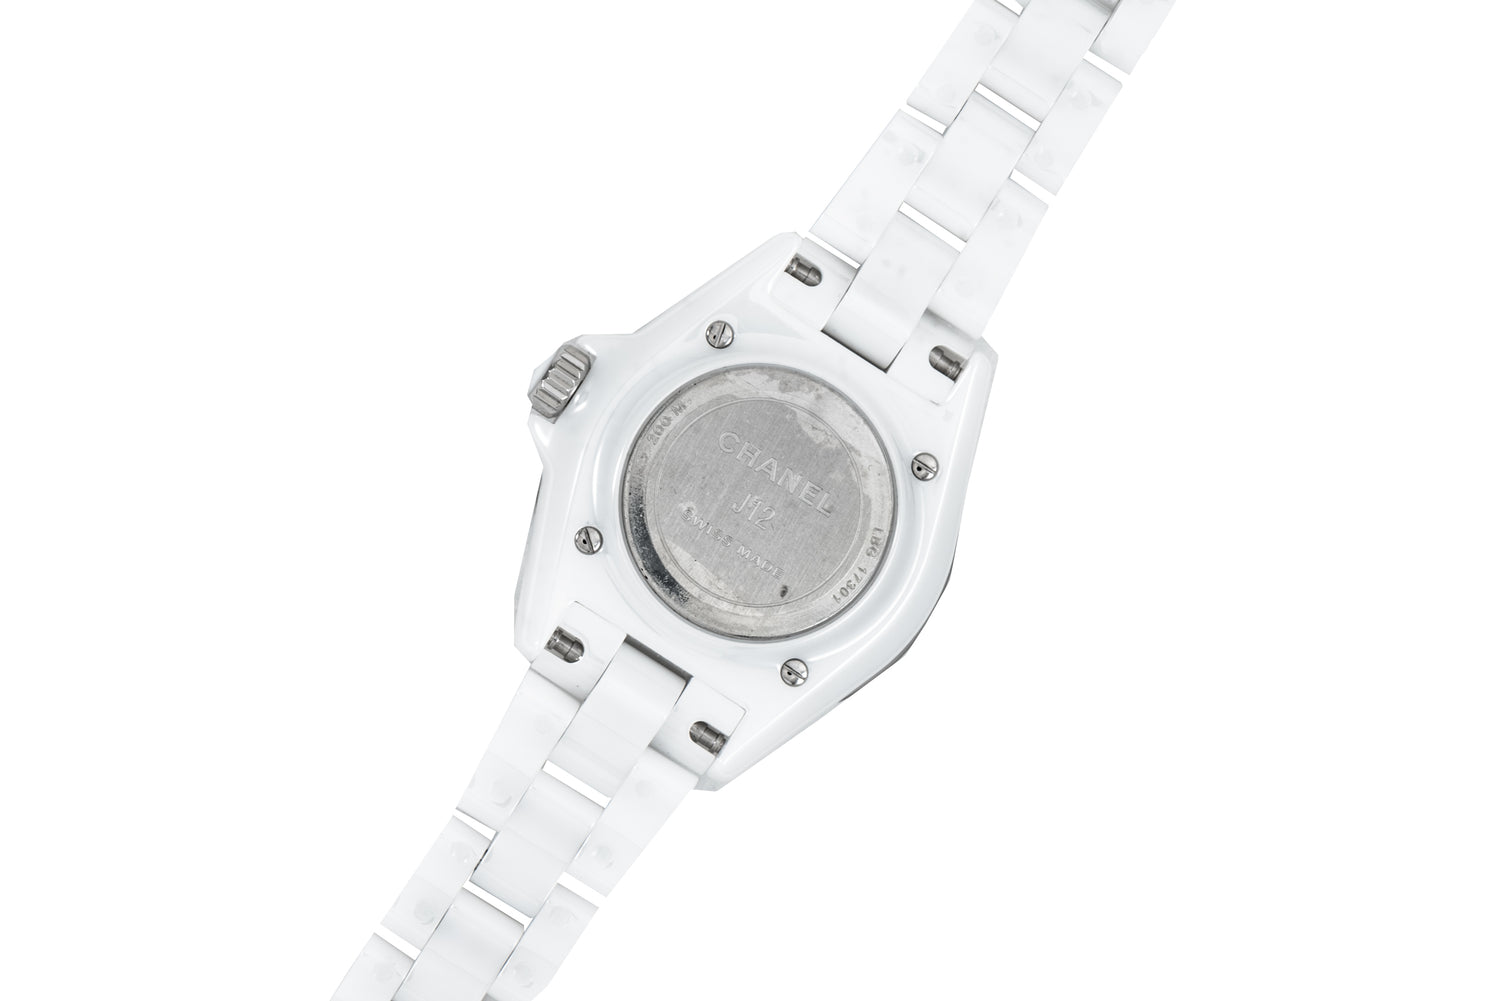 CHANEL J12 Quartz Lady's Watch in SS and White Ceramic